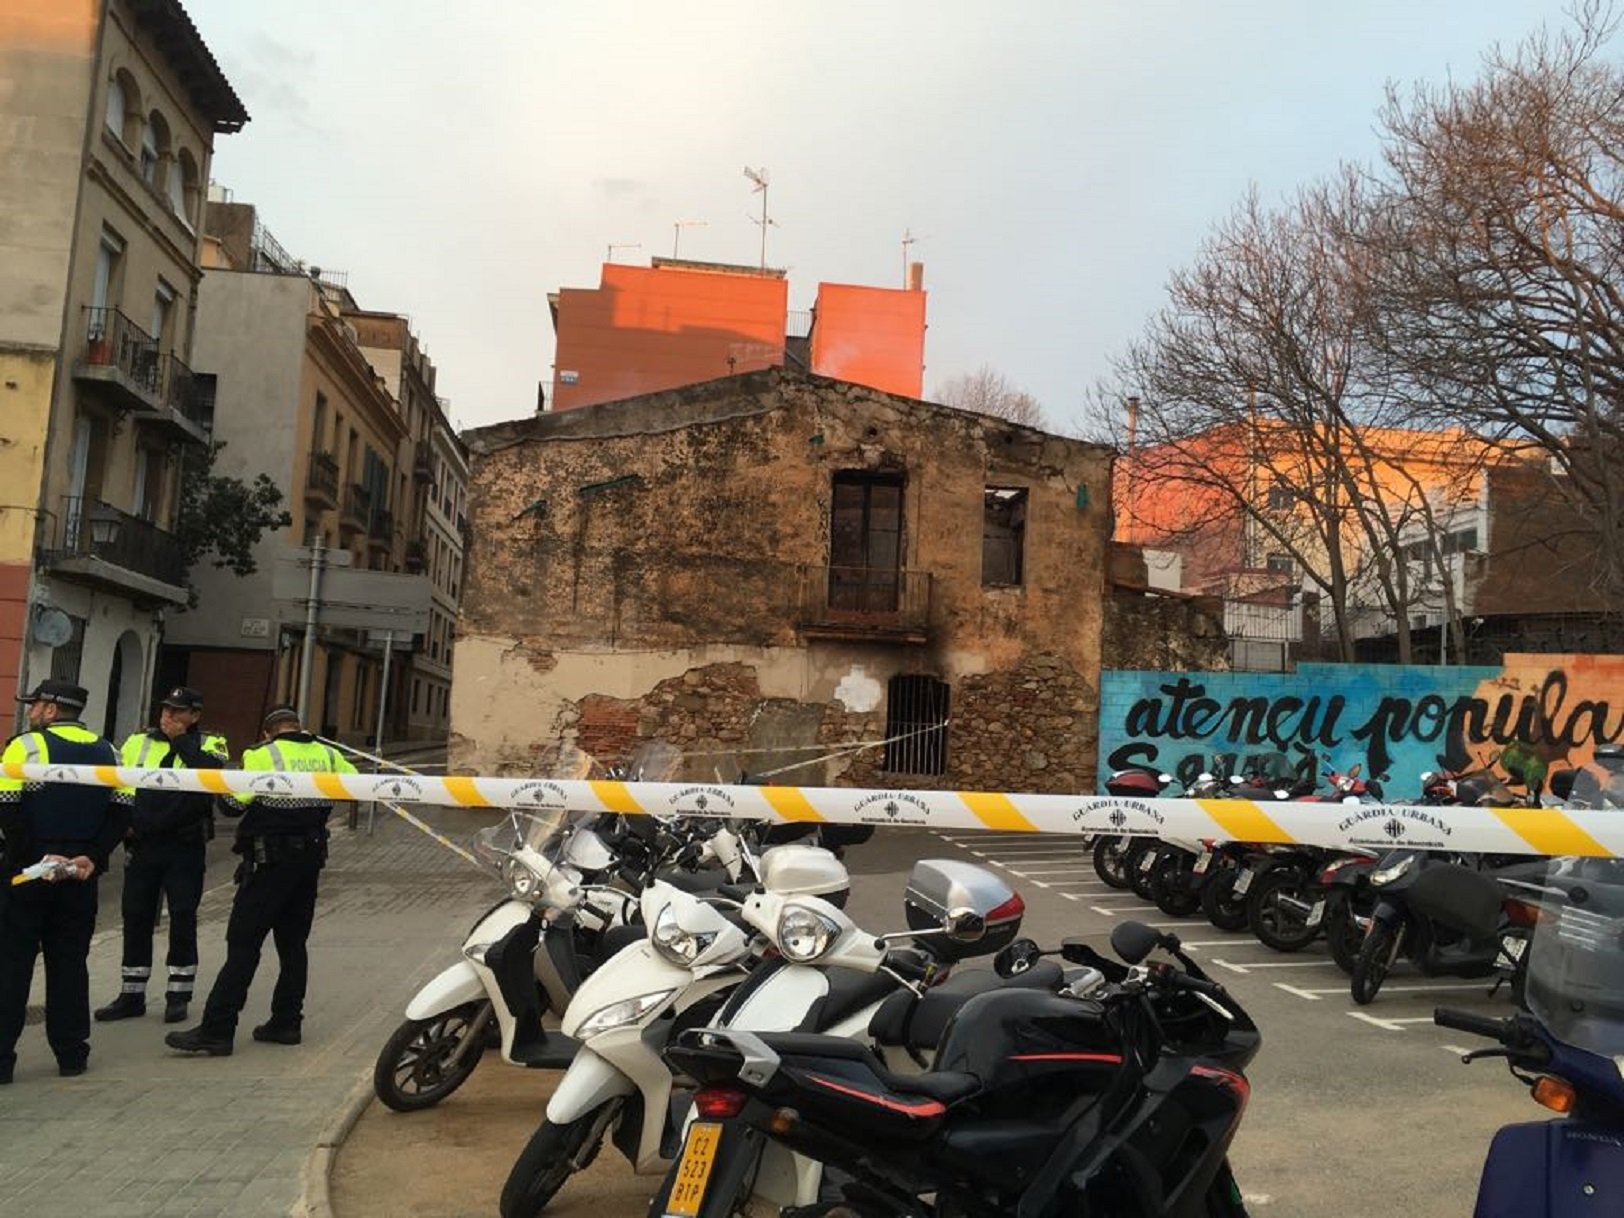 Barcelona youth centre burnt down, graffitied with nazi and fascist symbols